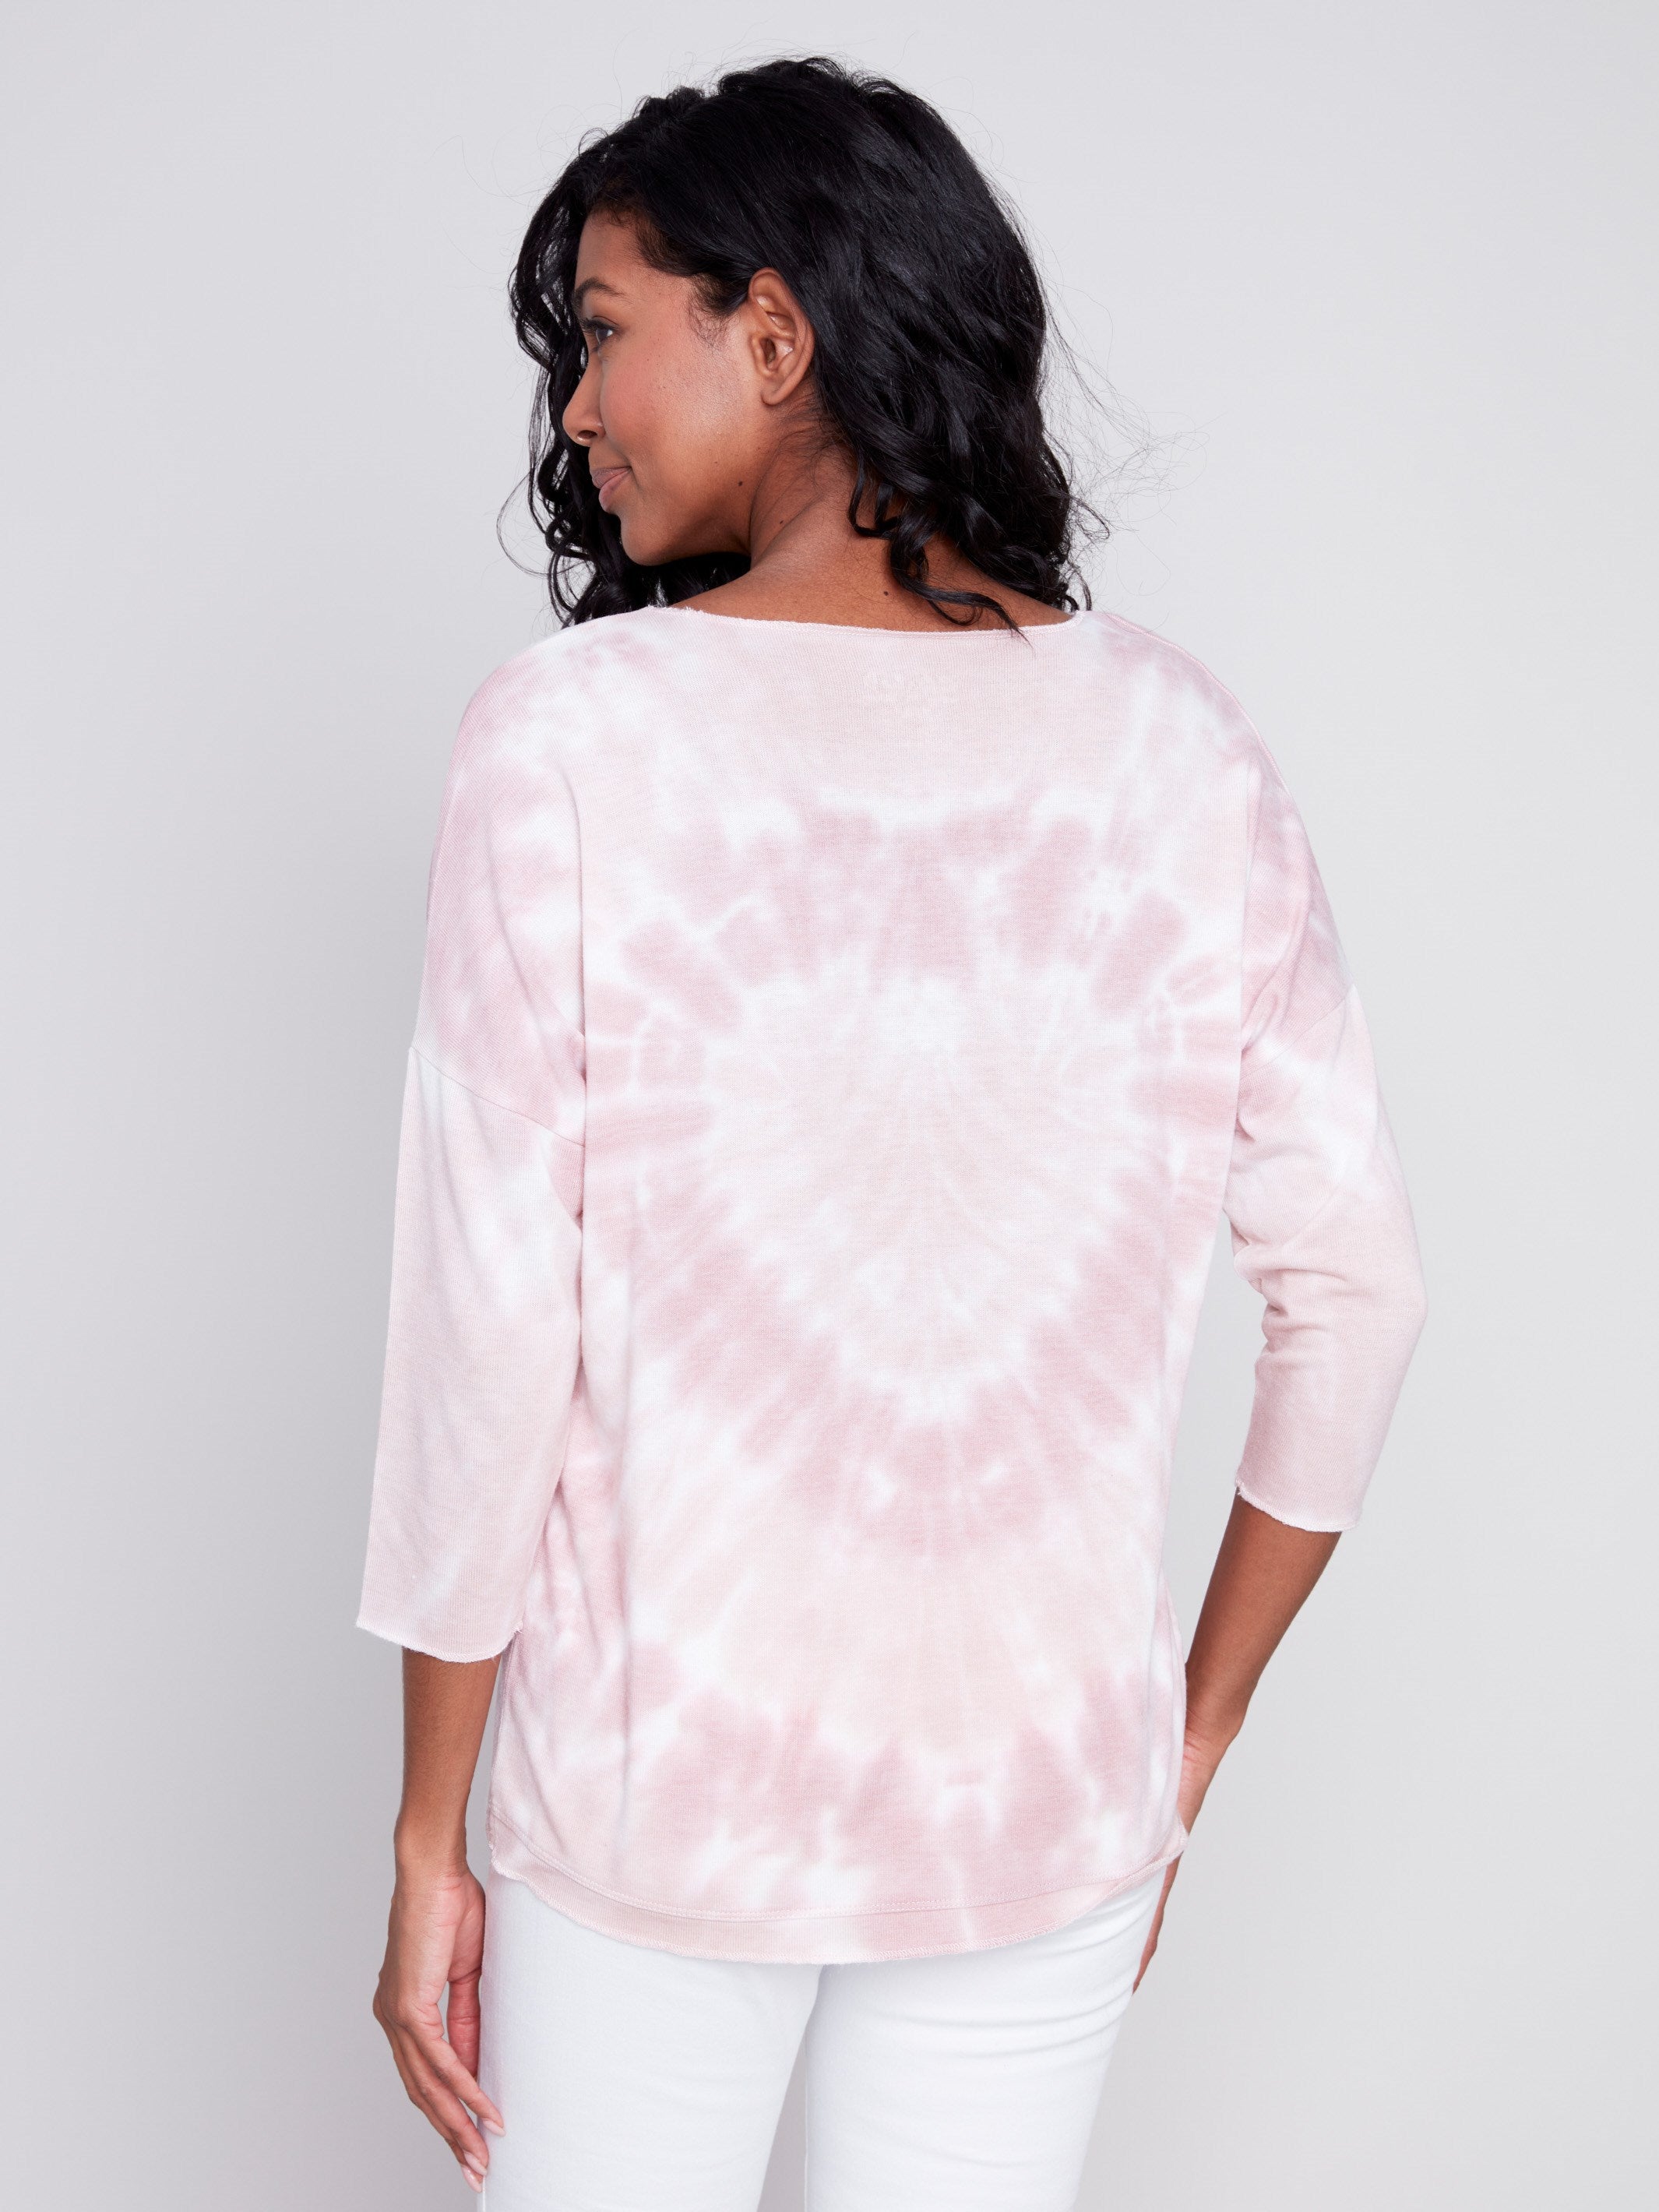 Tie Dye V-Neck Knit Top - Dusty Rose - Charlie B Collection Canada - Image 2